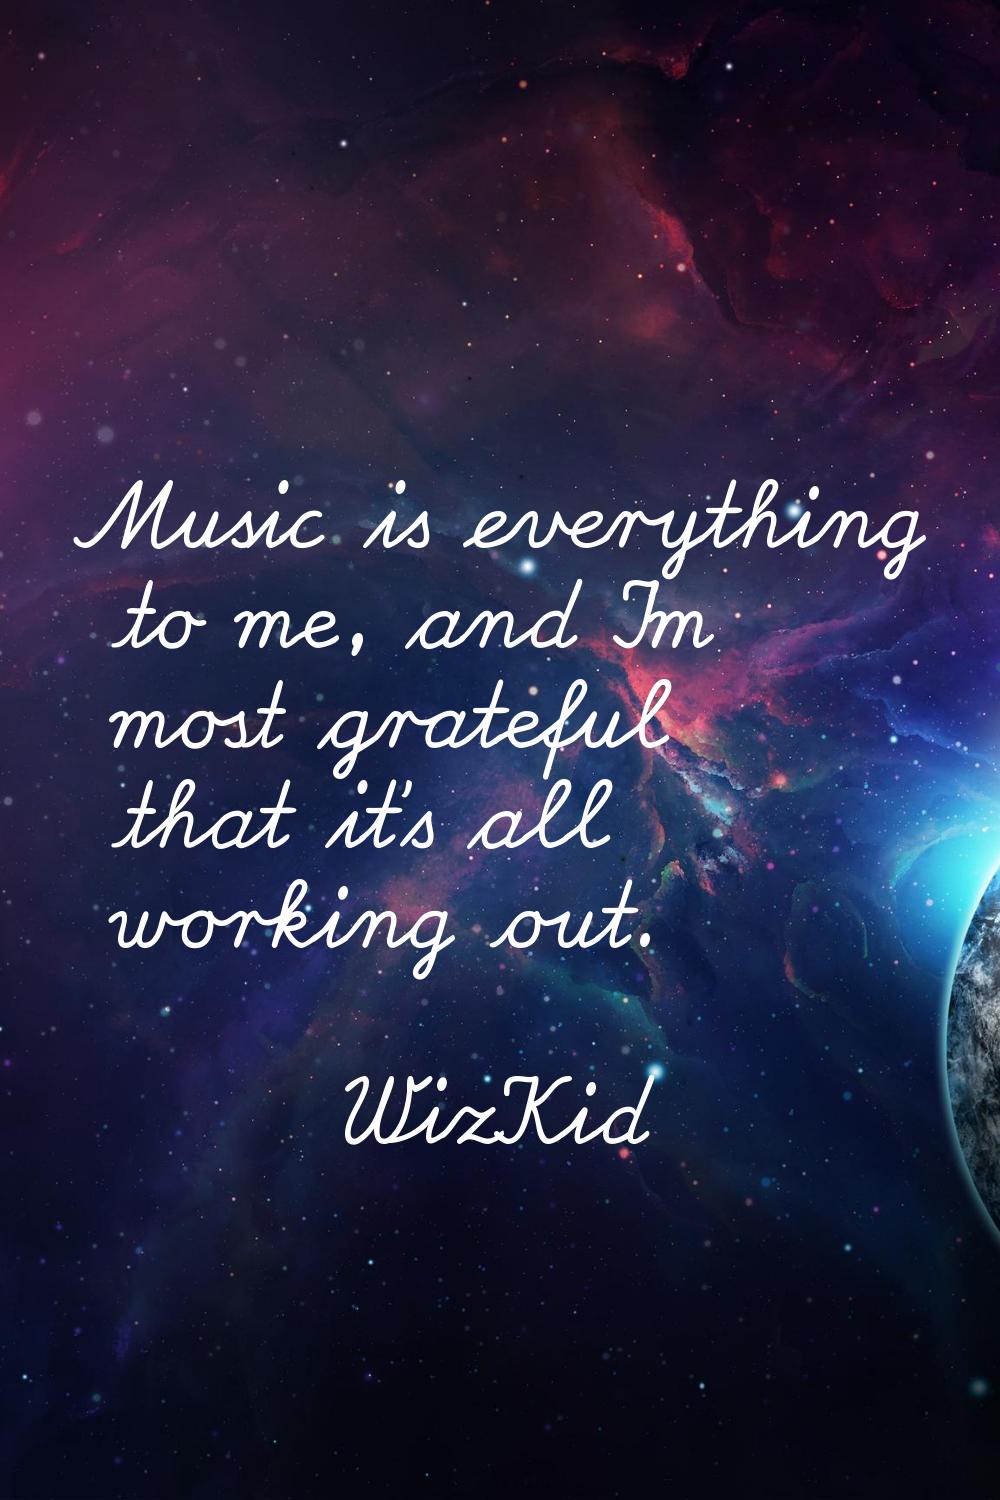 Music is everything to me, and I'm most grateful that it's all working out.